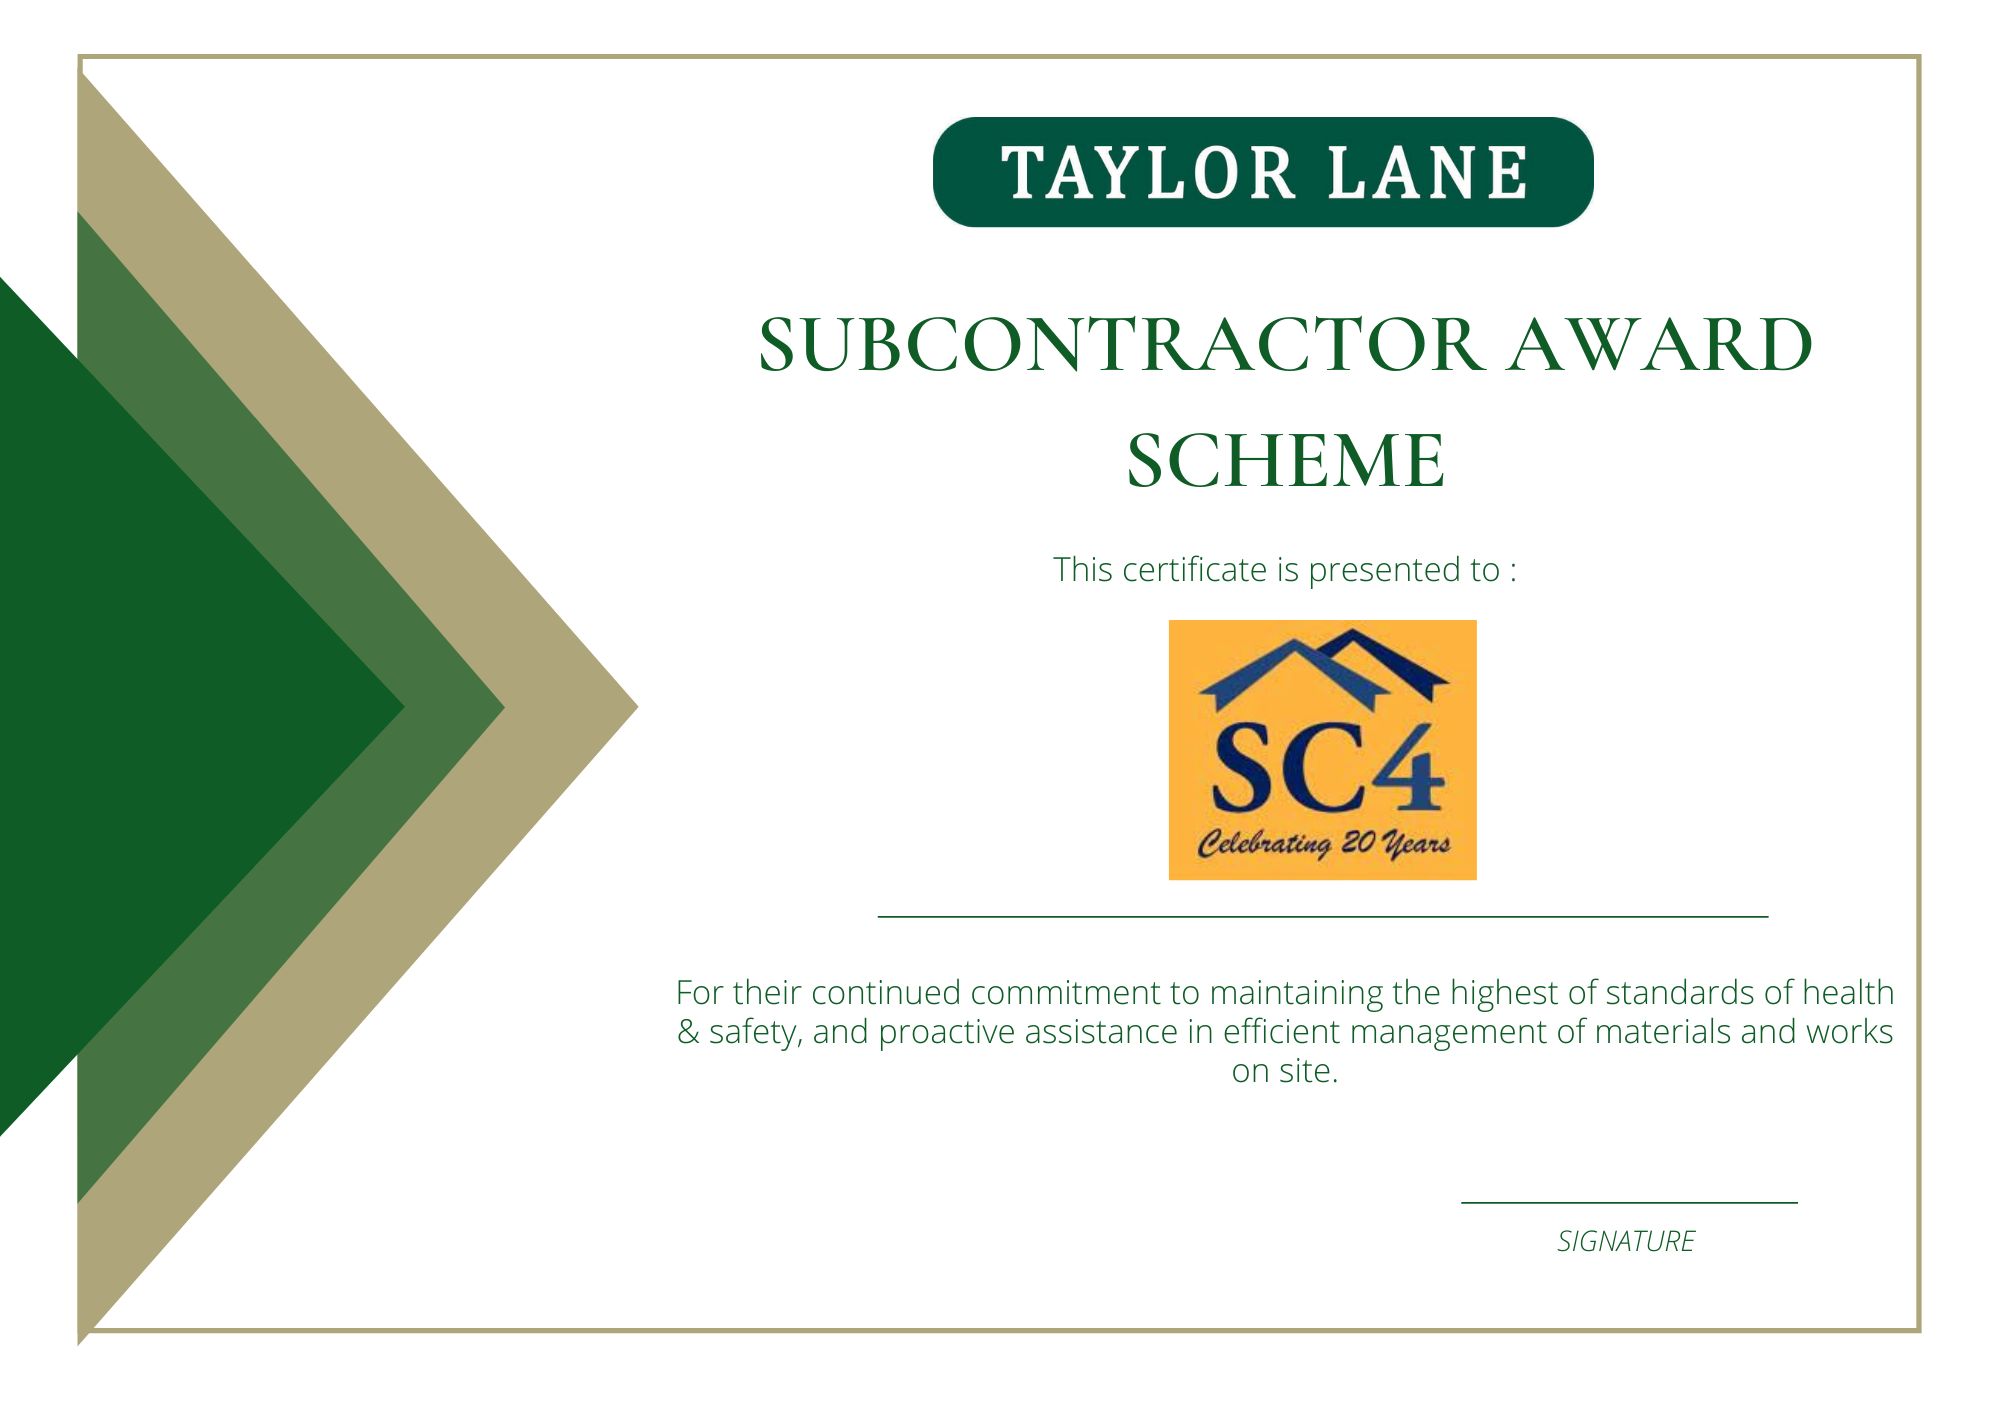 SC4 named first winners of Taylor Lane Timber Frame's Subcontractor Award